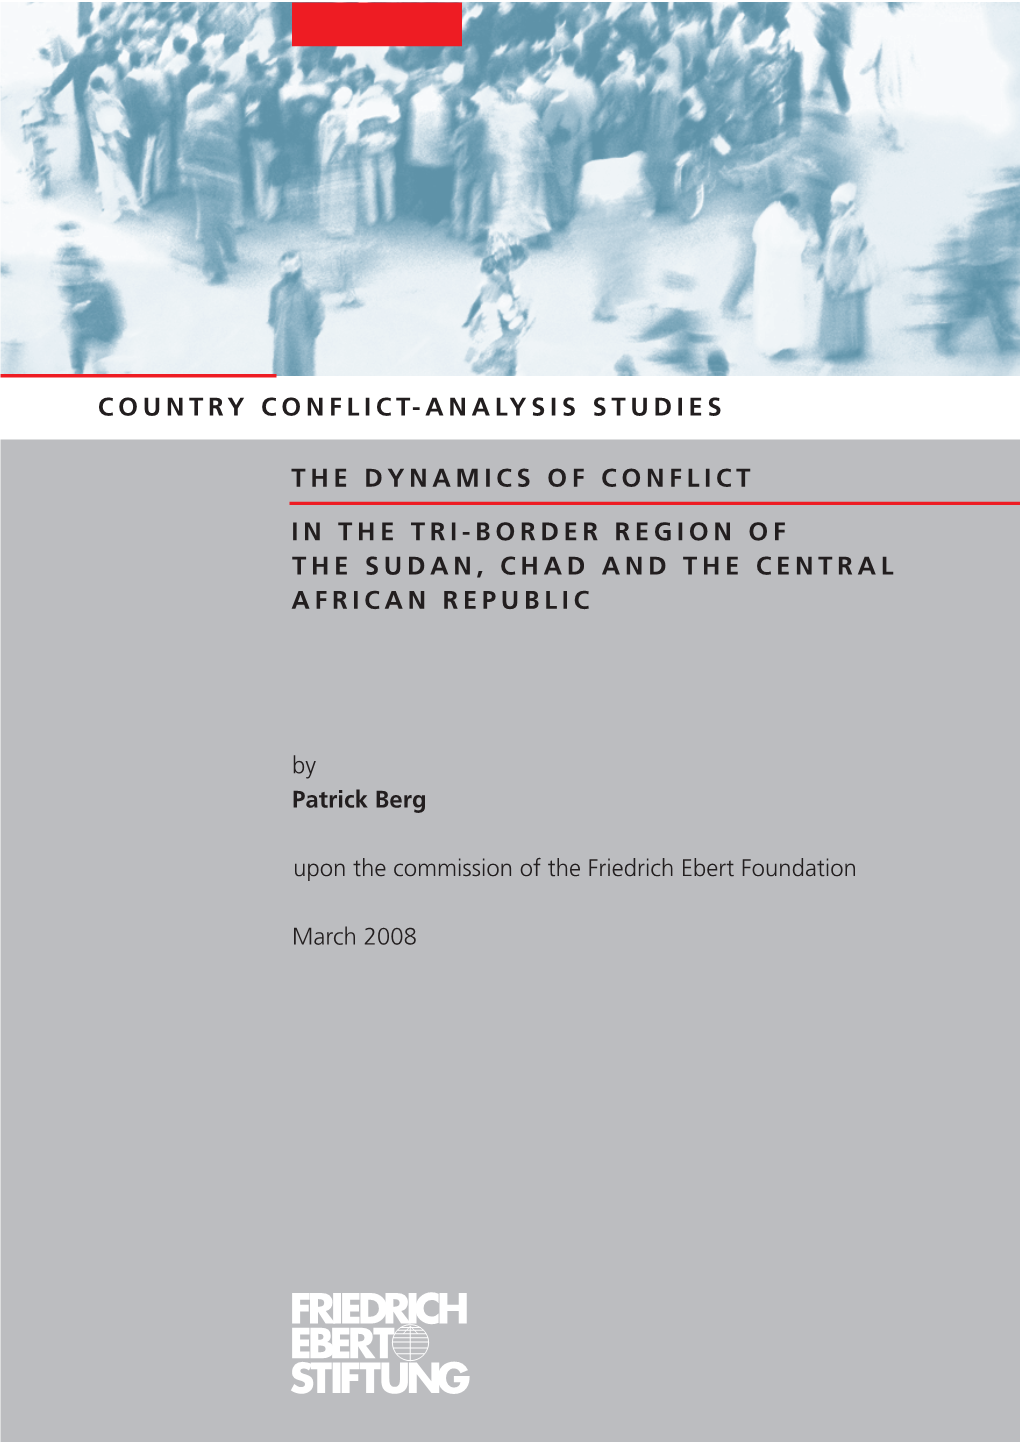 The Dynamics of Conflict in the Tri-Border Region of Sudan, Chad